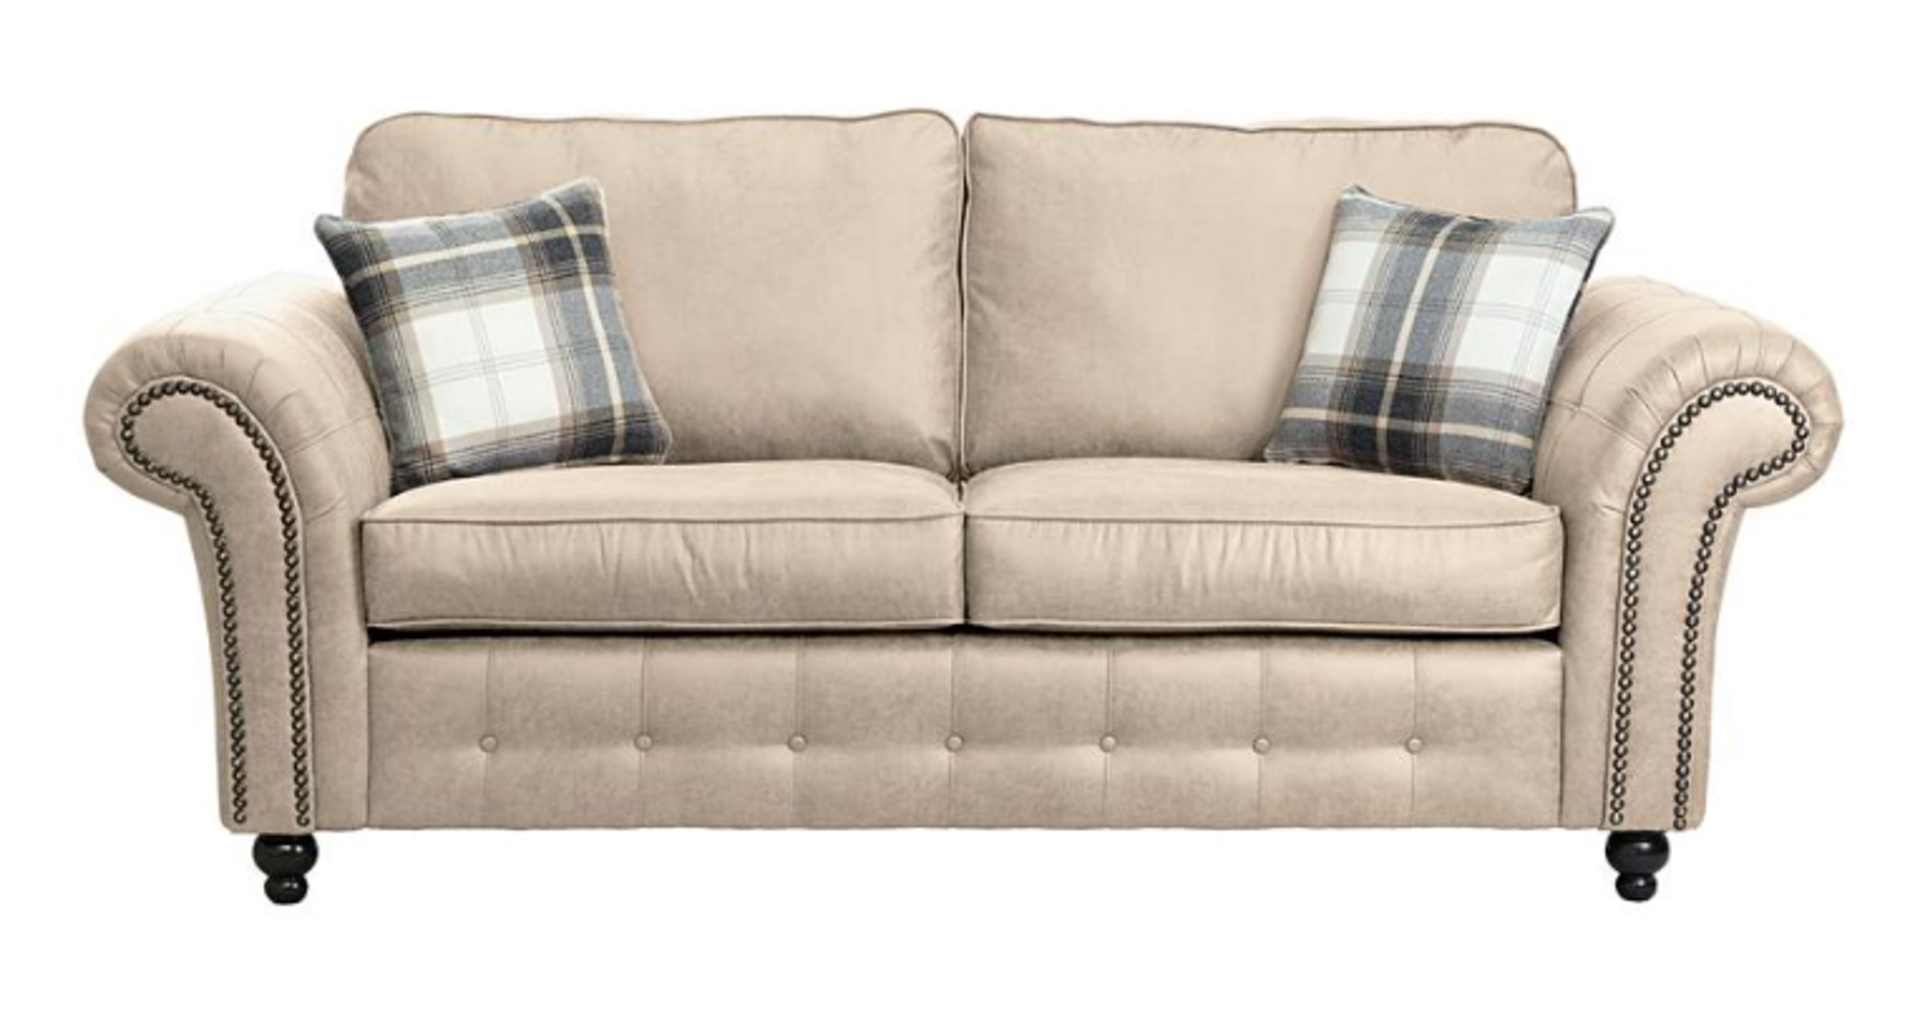 Oakland 3 Seater Sofa. - SR. RRP £1,099.00. The Oakland range is perfect for those wanting a